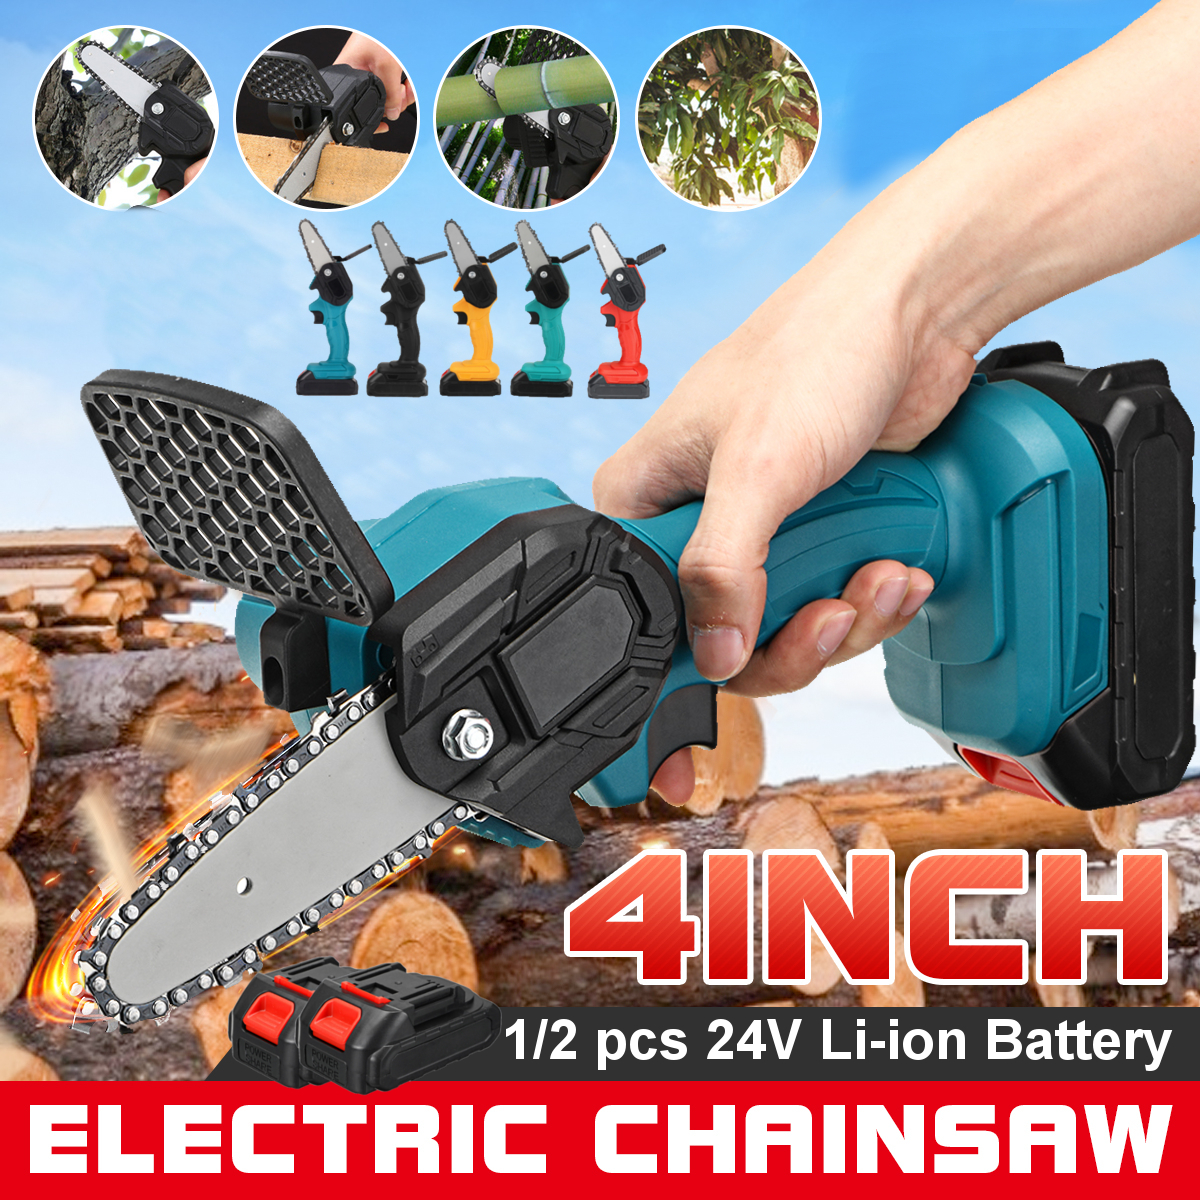 4-Inch-Portable-Cordless-Electric-Chain-Saw-Wood-3000rmin-Tree-ChainSaws-Wood-Cutting-Tool-W-1-or-2--1770254-1